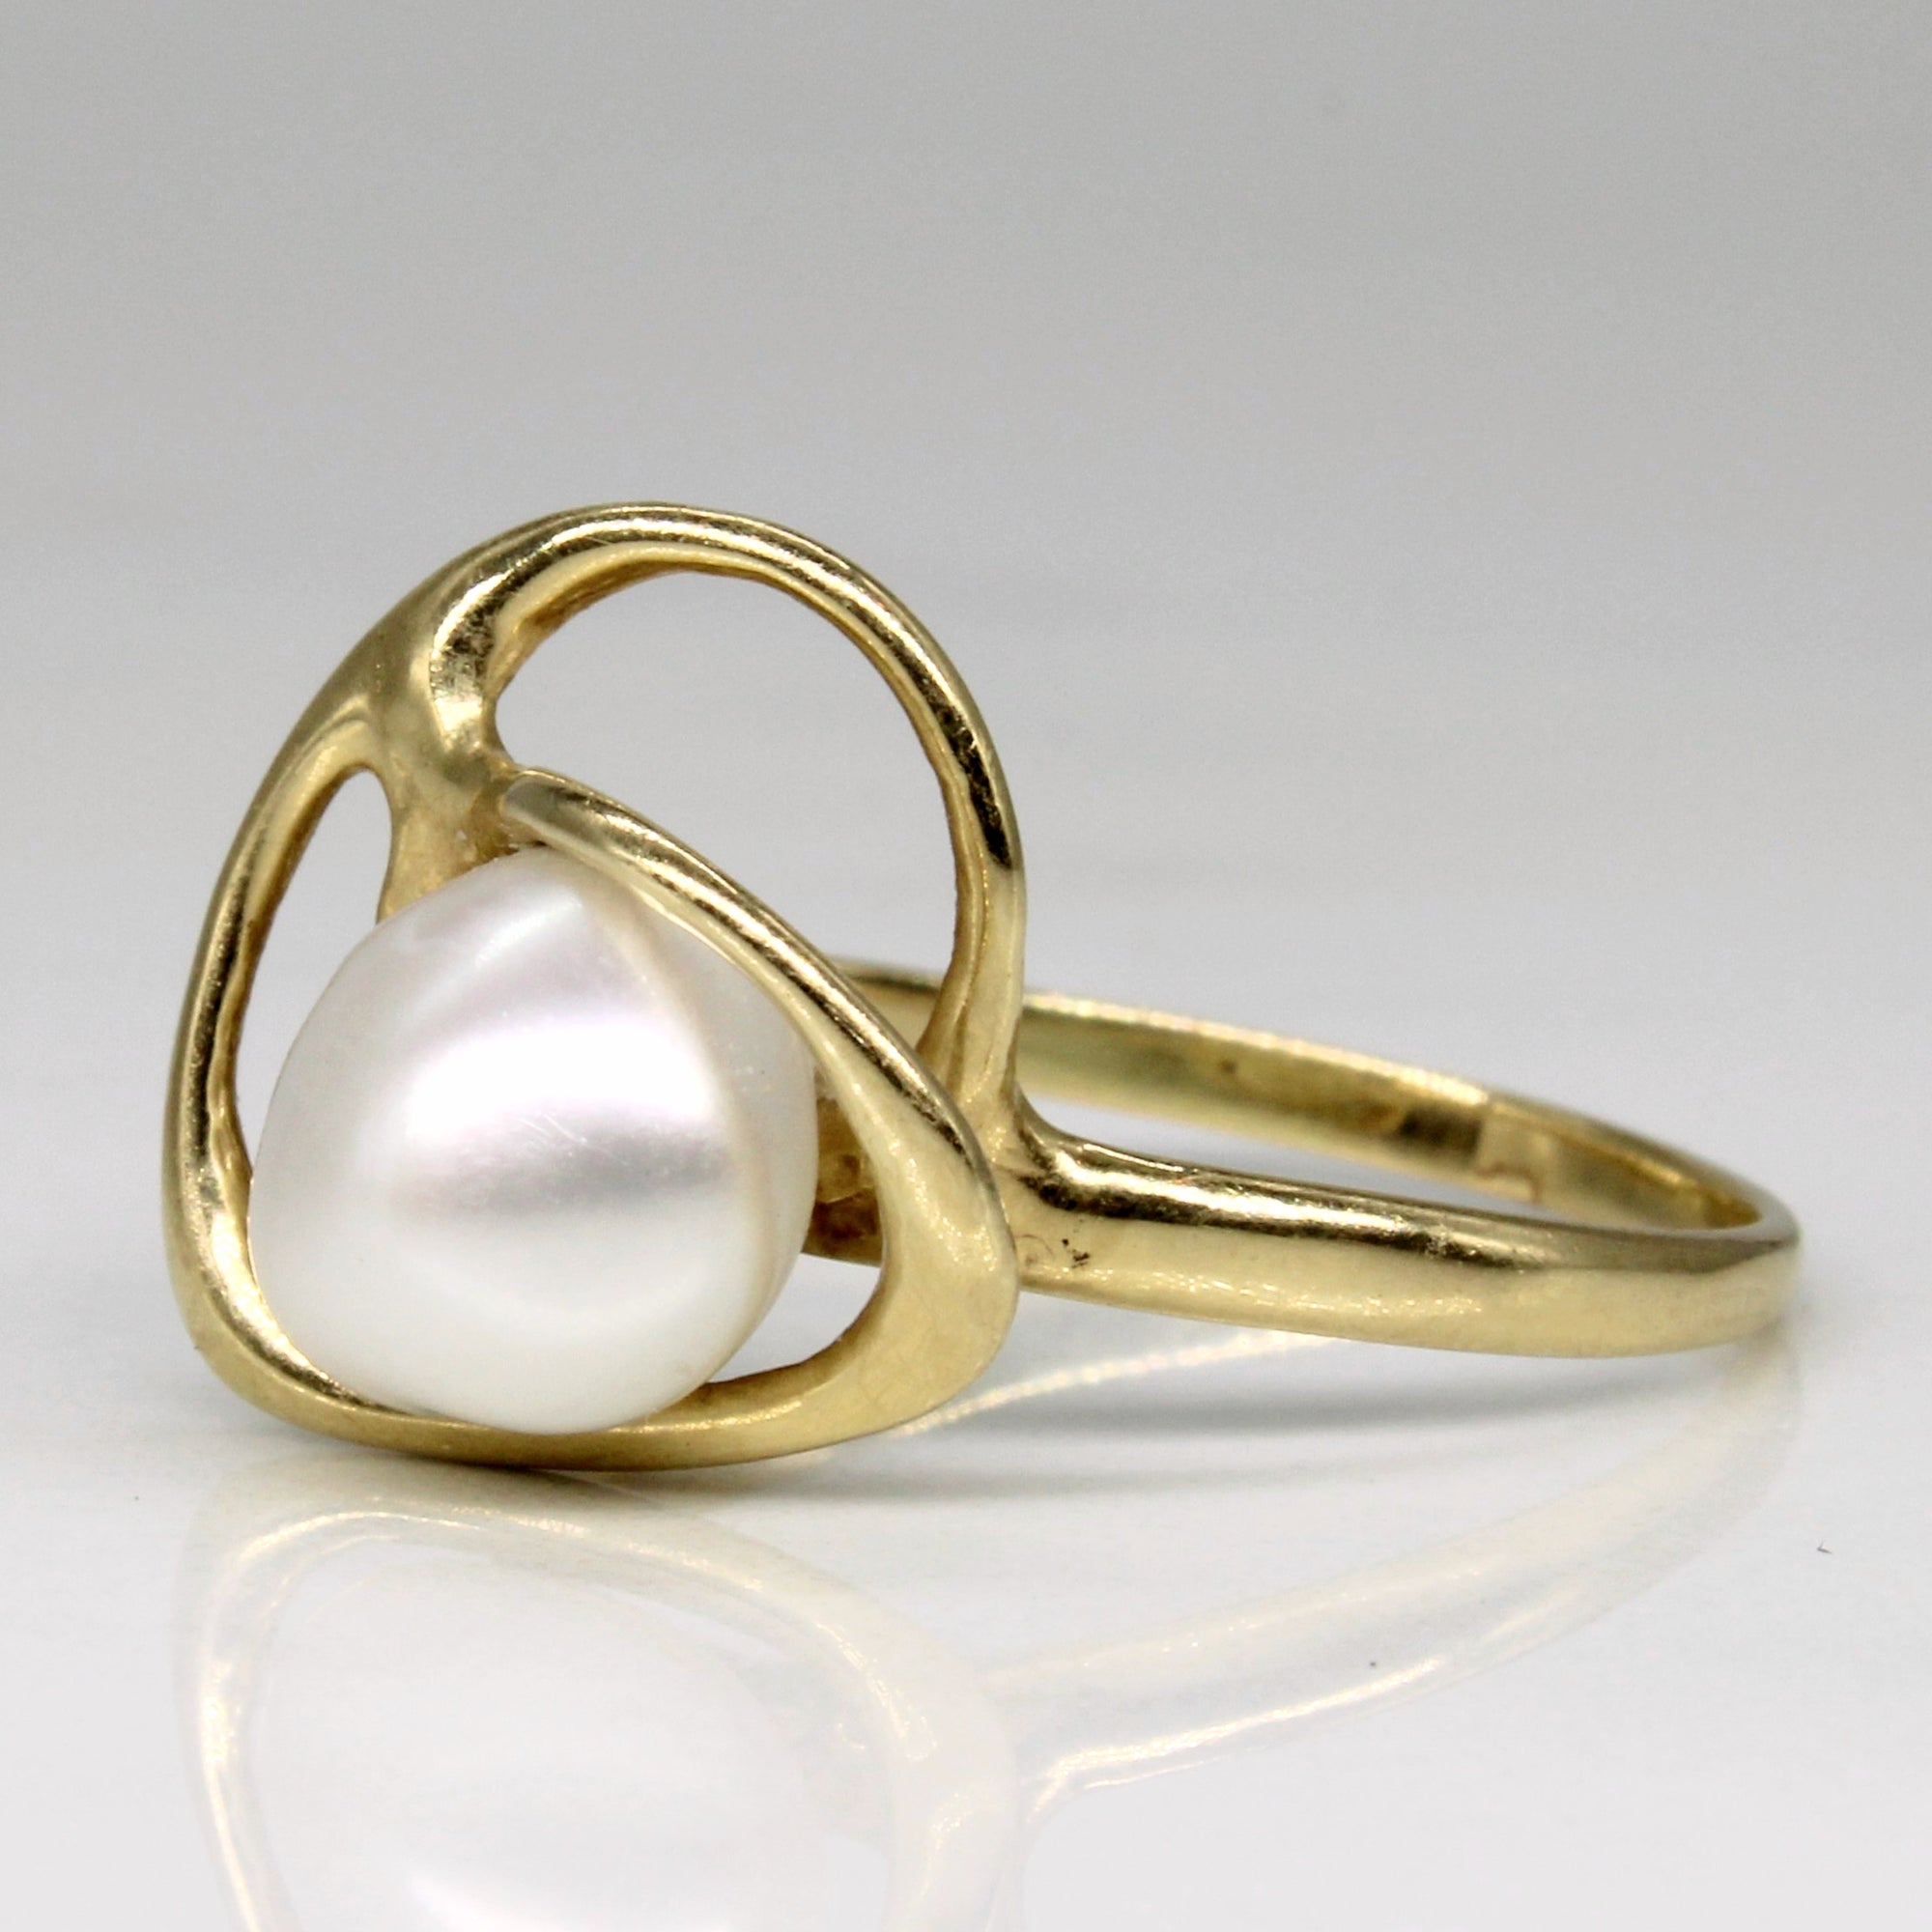 Abstract Baroque Pearl Ring | SZ 7.75 |